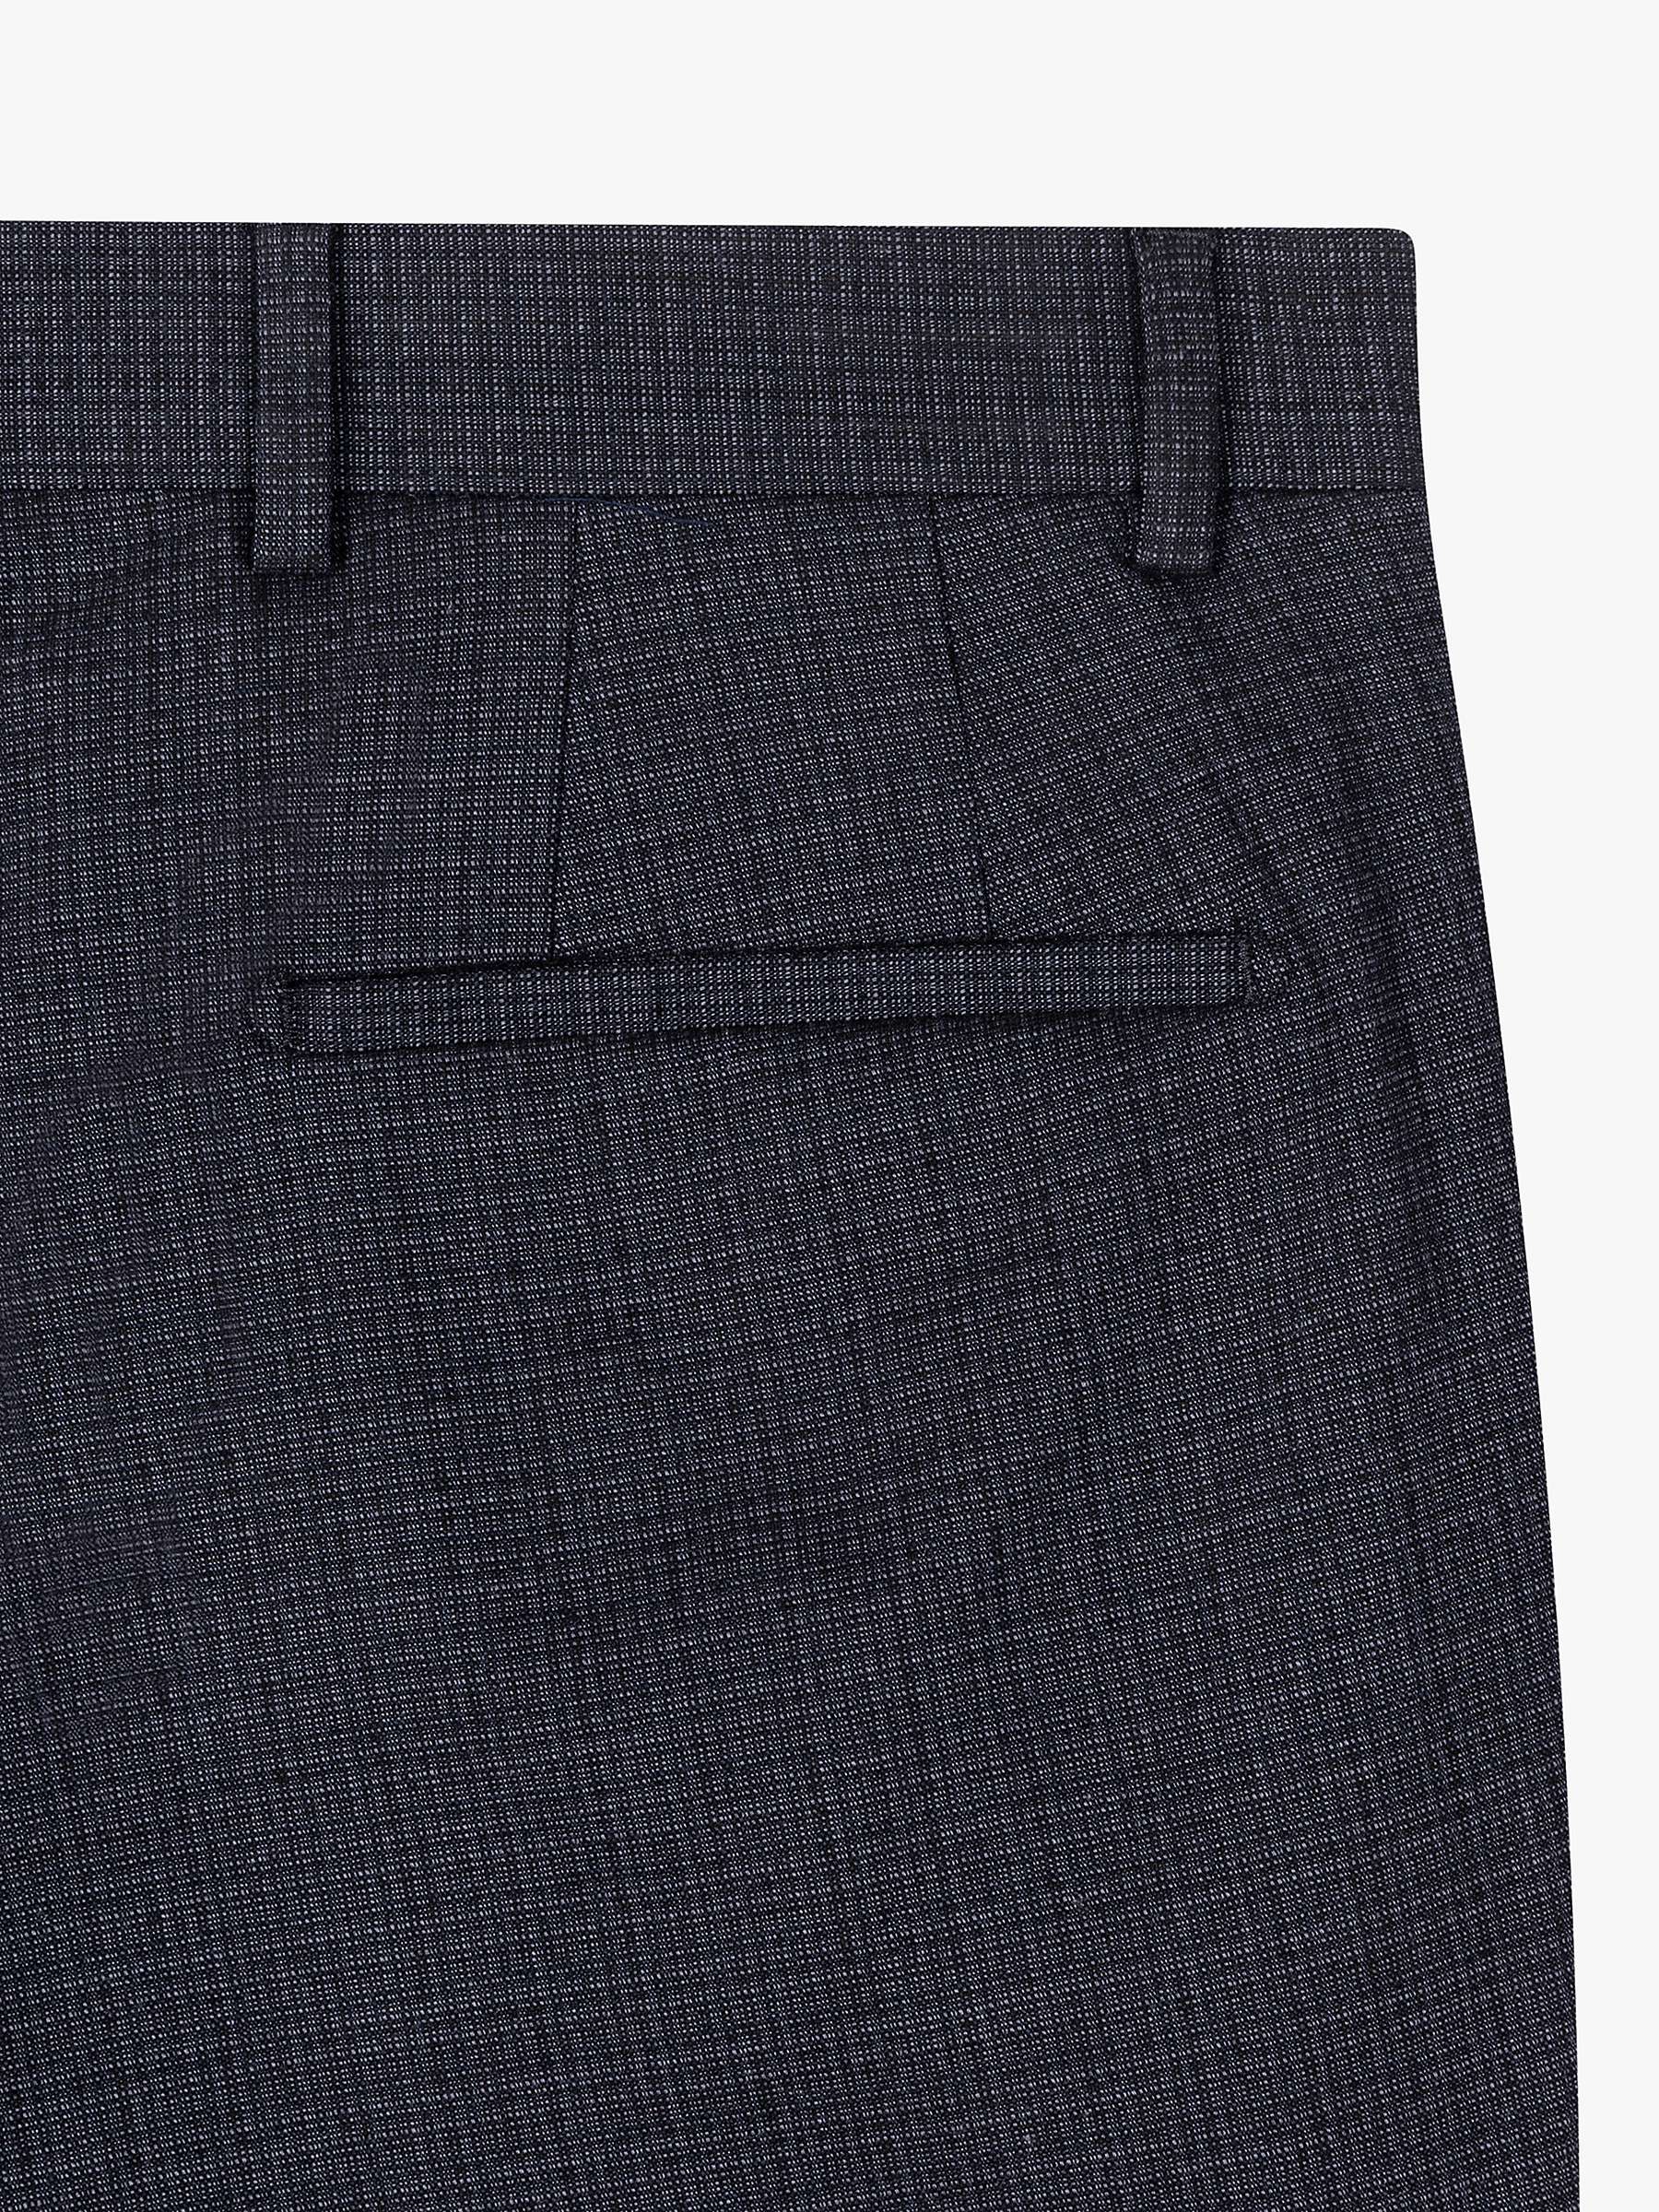 Buy Paul Smith Mid-Fit Chino, Black Online at johnlewis.com